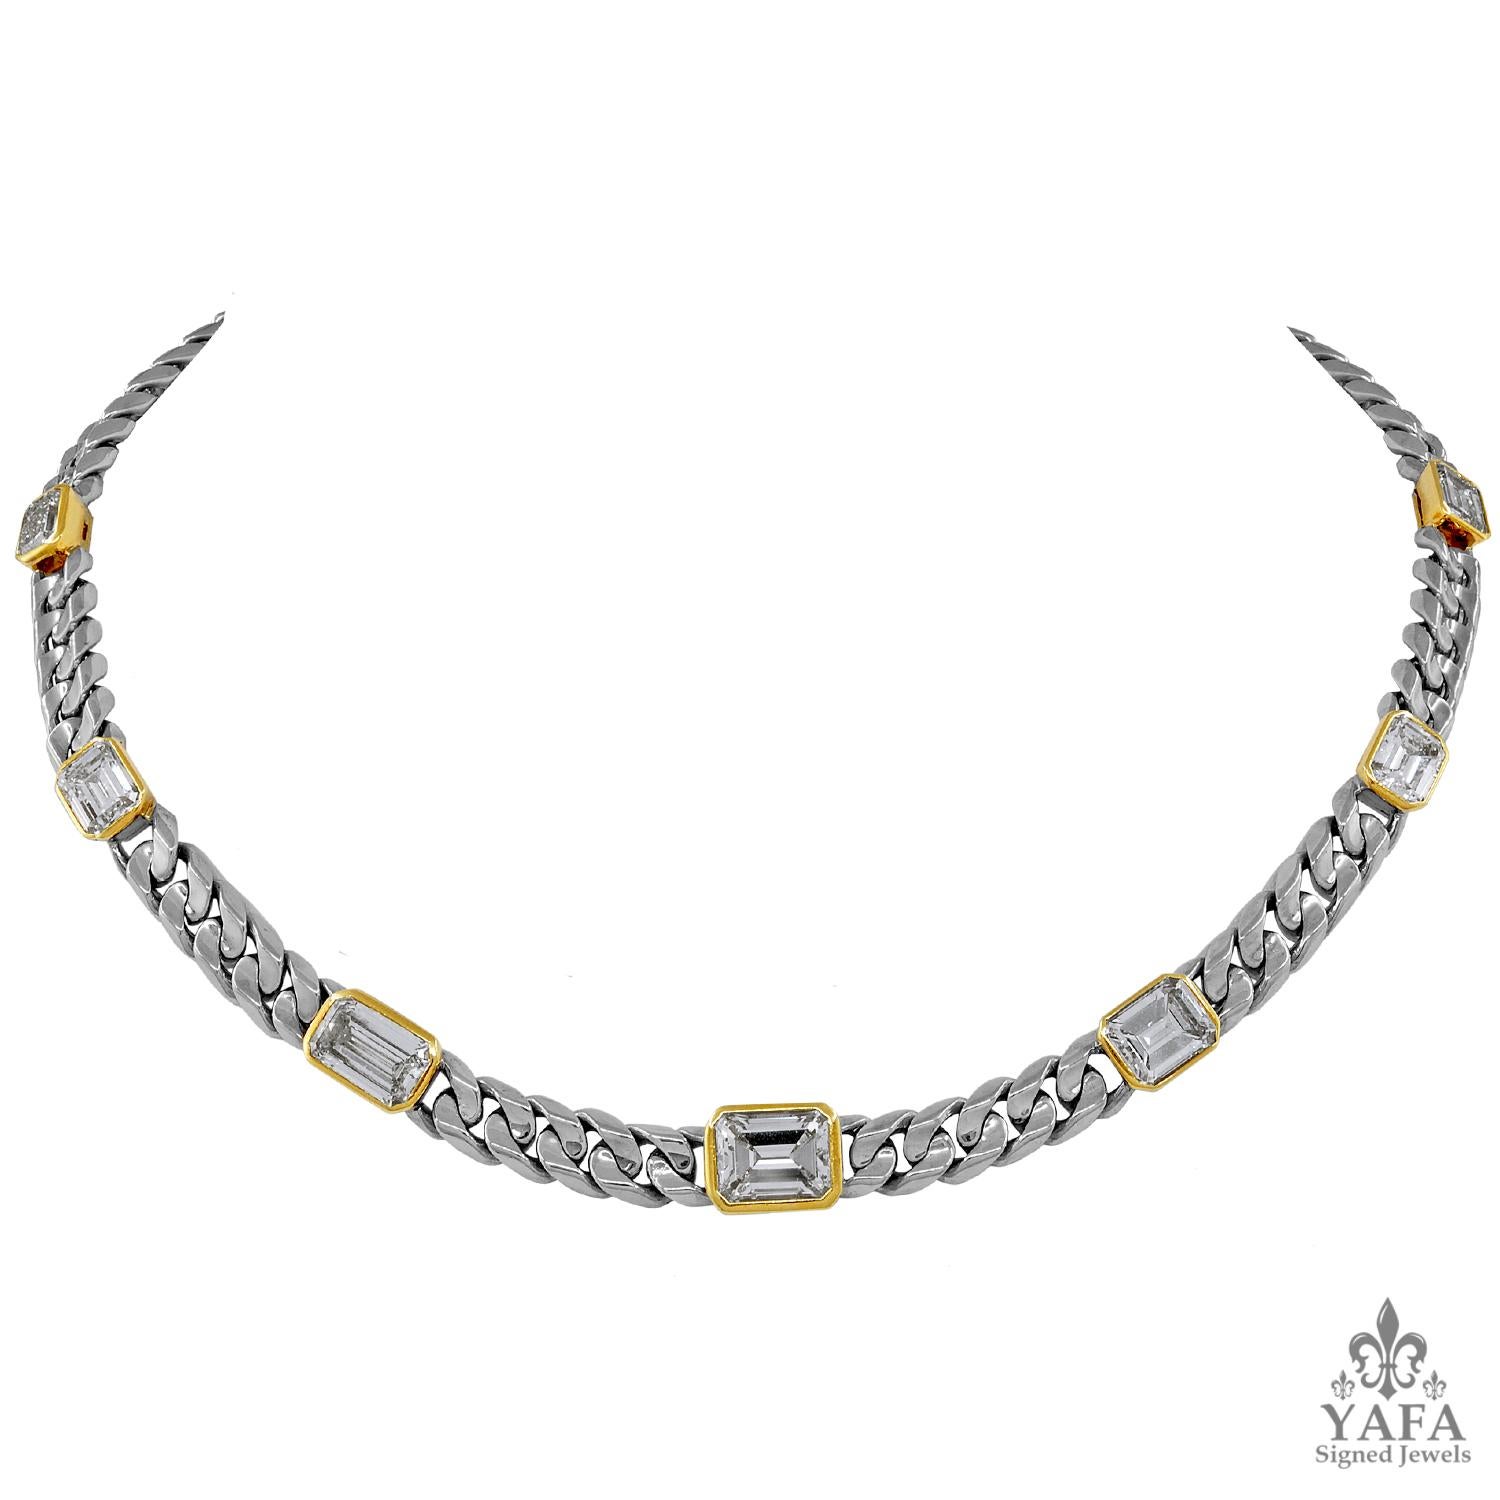 BULGARI Two Tone Gold Diamond Link Necklace & Earrings
An 18k white and yellow gold link necklace and ear clips, set with emerald-cut diamond, signed Bulgari.
necklace – seven emerald cut diamonds total carat weight is approx. 10.70 cts.
earrings –